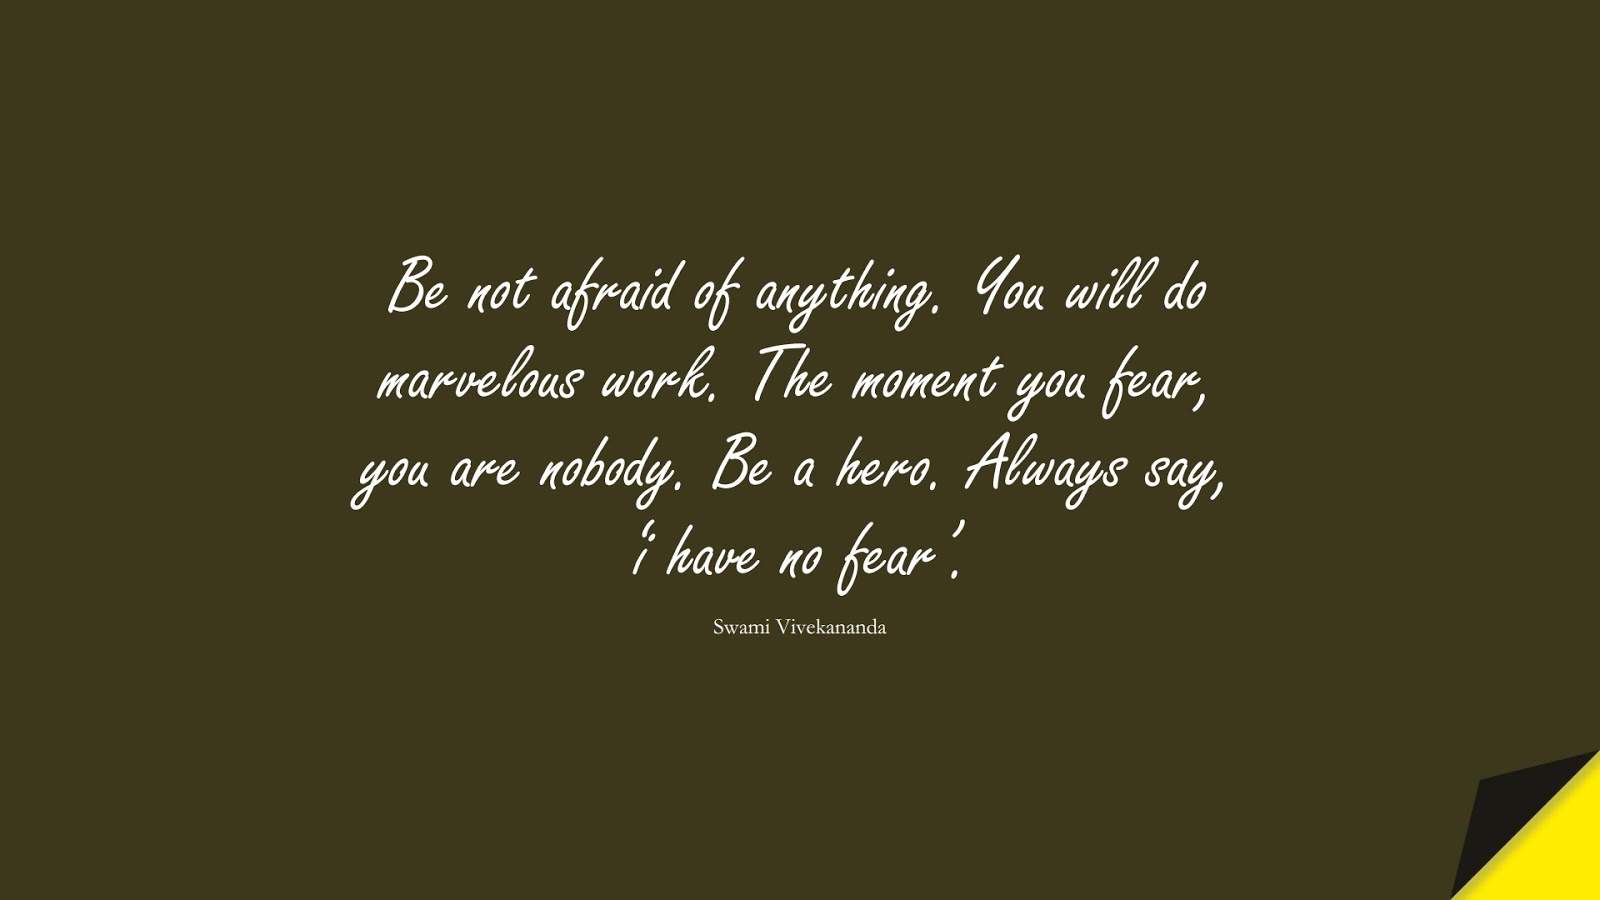 Be not afraid of anything. You will do marvelous work. The moment you fear, you are nobody. Be a hero. Always say, ‘i have no fear’. (Swami Vivekananda);  #FearQuotes